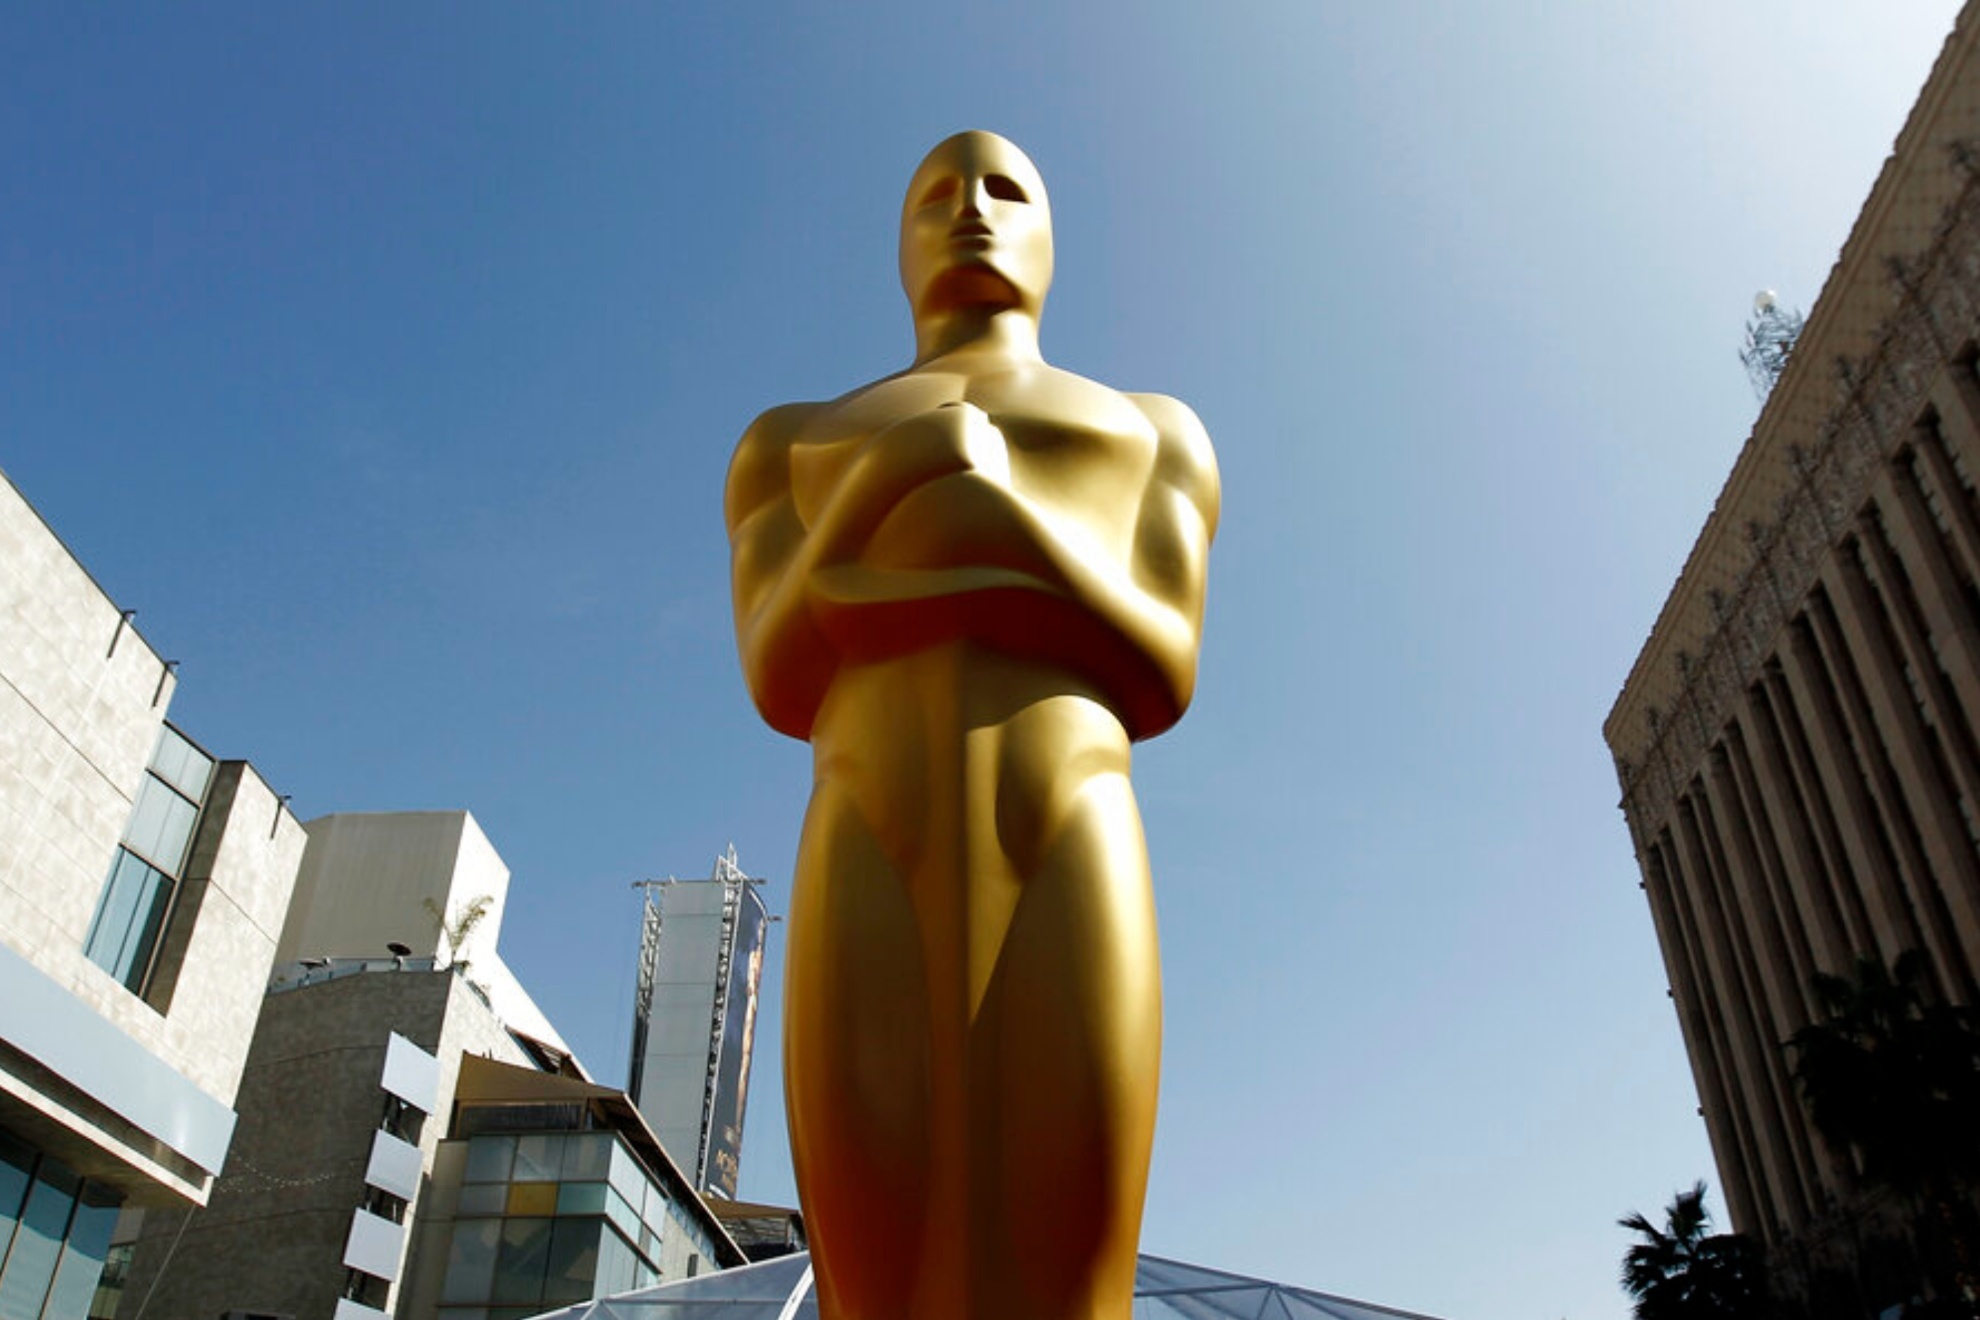 Oppenheimer leads the nomination list for the 95th Academy Awards.